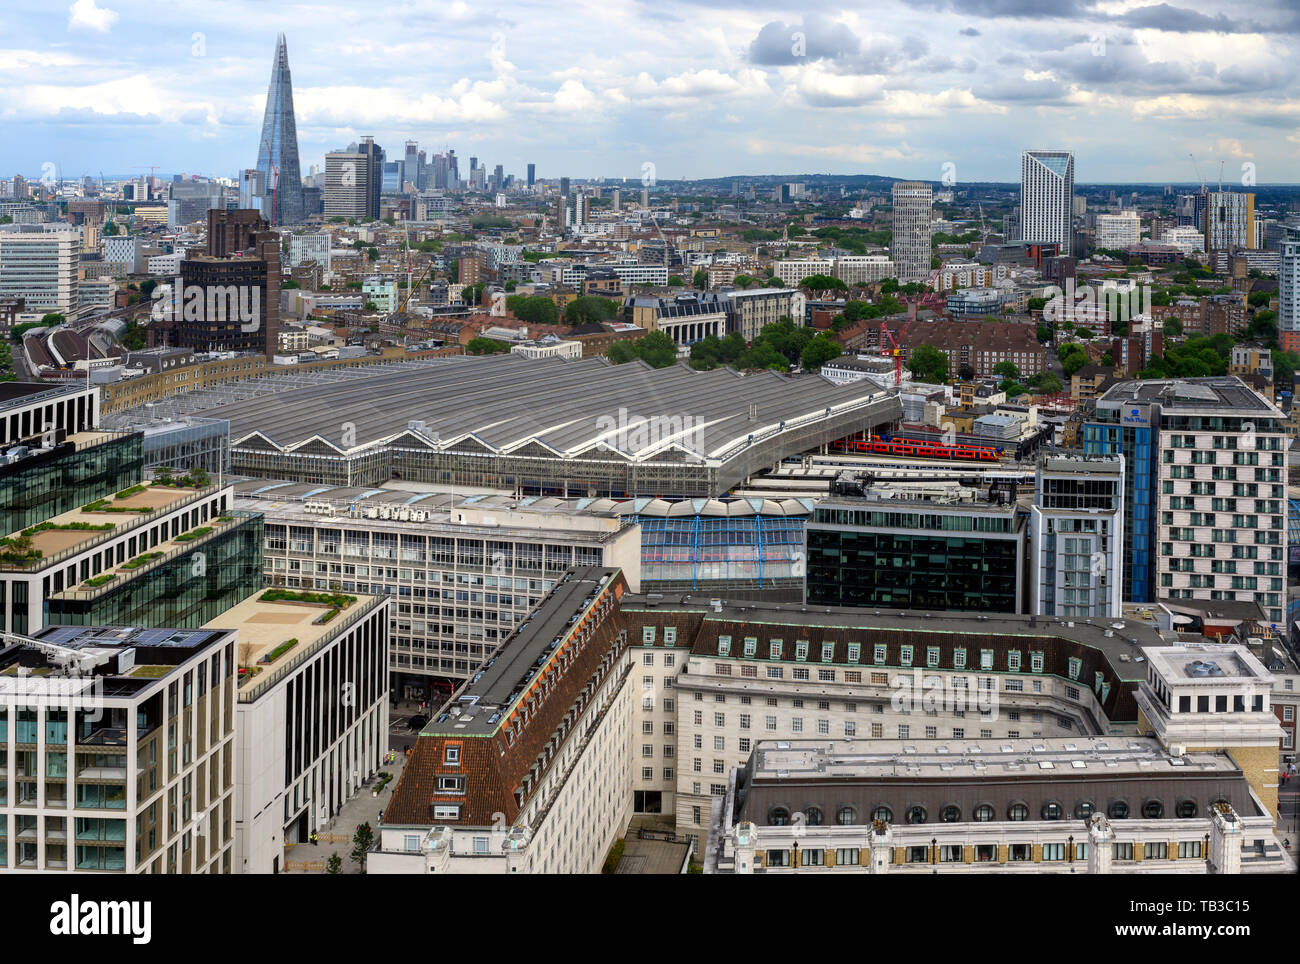 Aerial view of south London showing the vast roof of Waterloo railway Station, Waterloo, London, England, UK Stock Photo